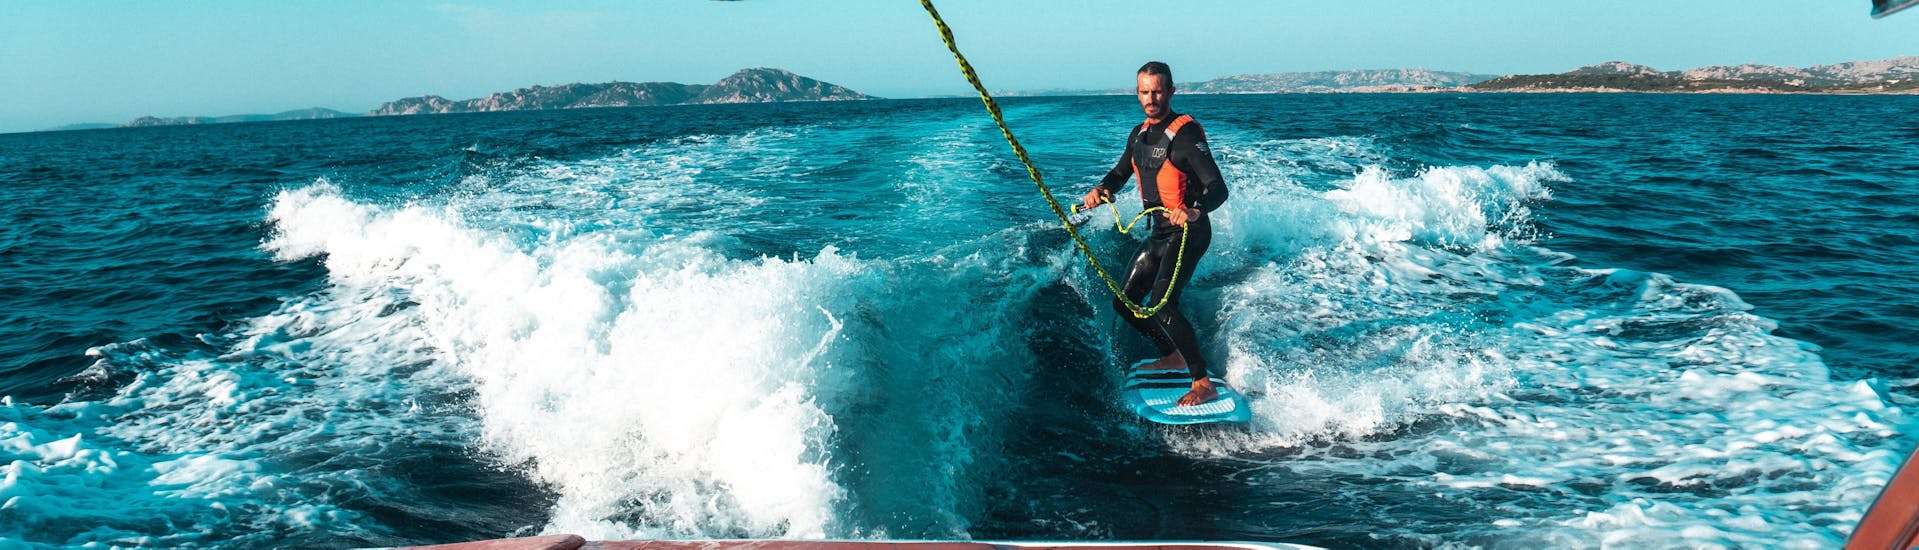 Wakeboard &amp; Wakesurf Lessons - All Levels with FH Academy Sardinia - Hero image